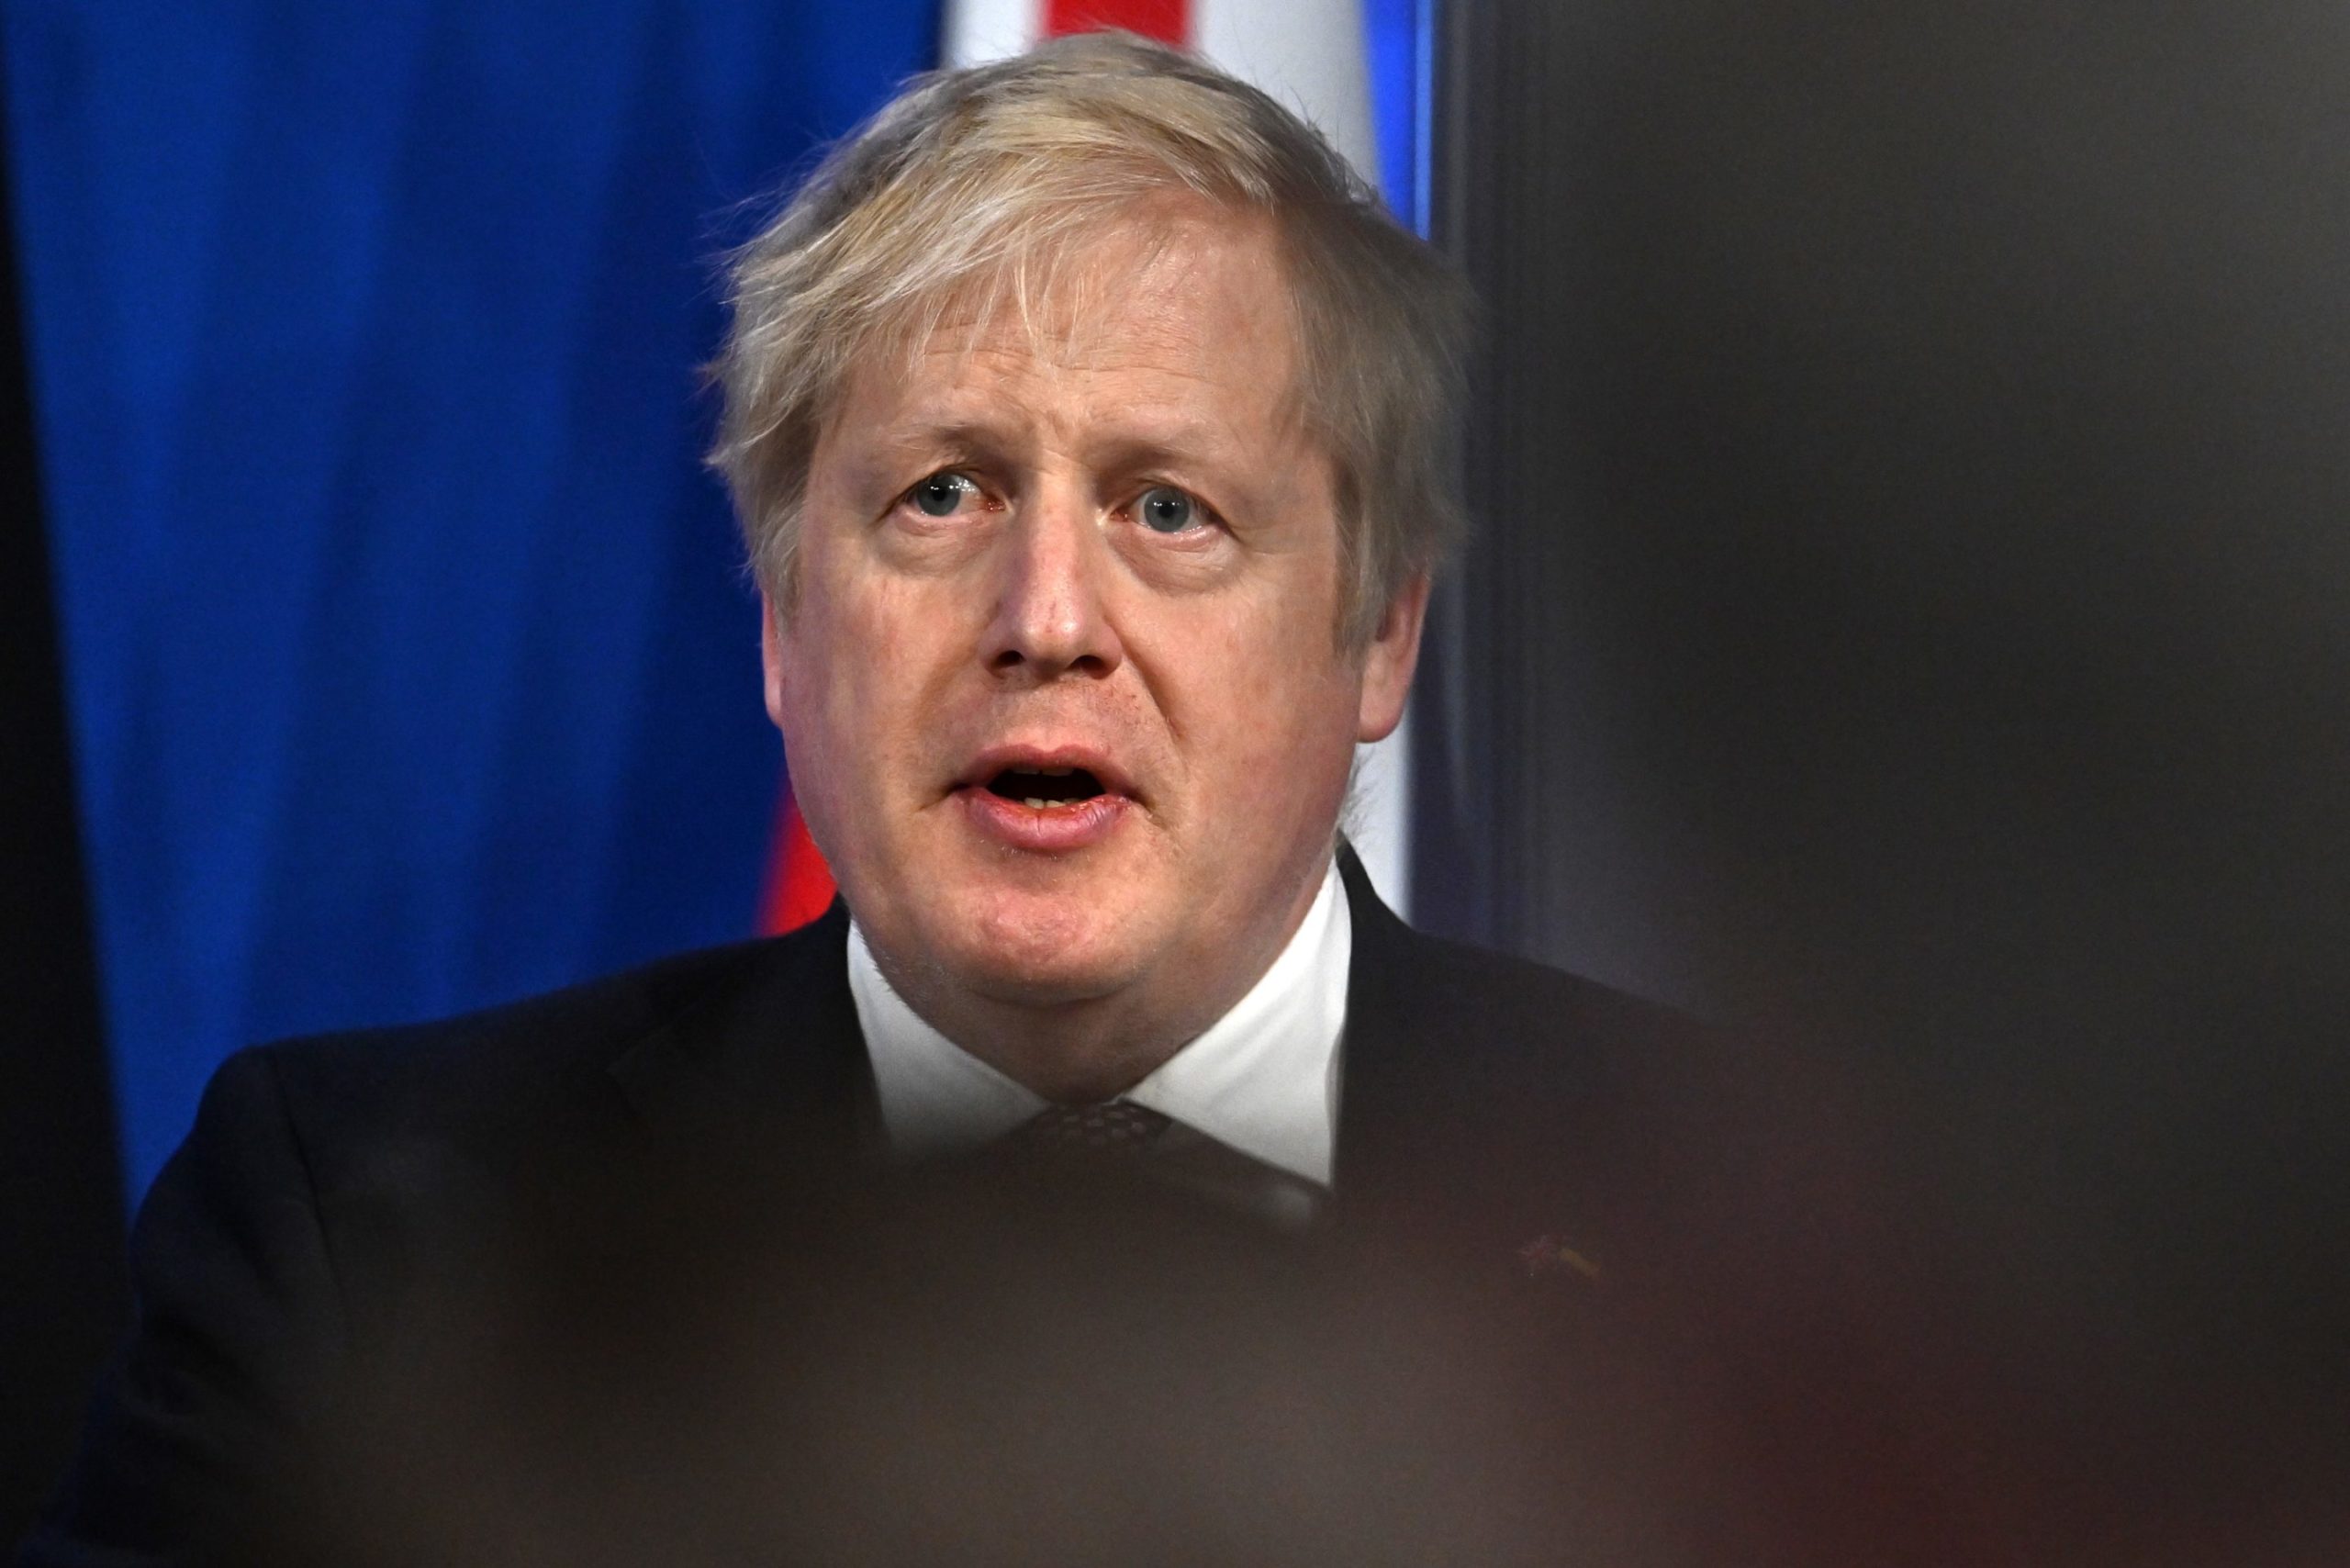 Boris Johnson fined by the police over 'partygate' scandal during COVID lockdown